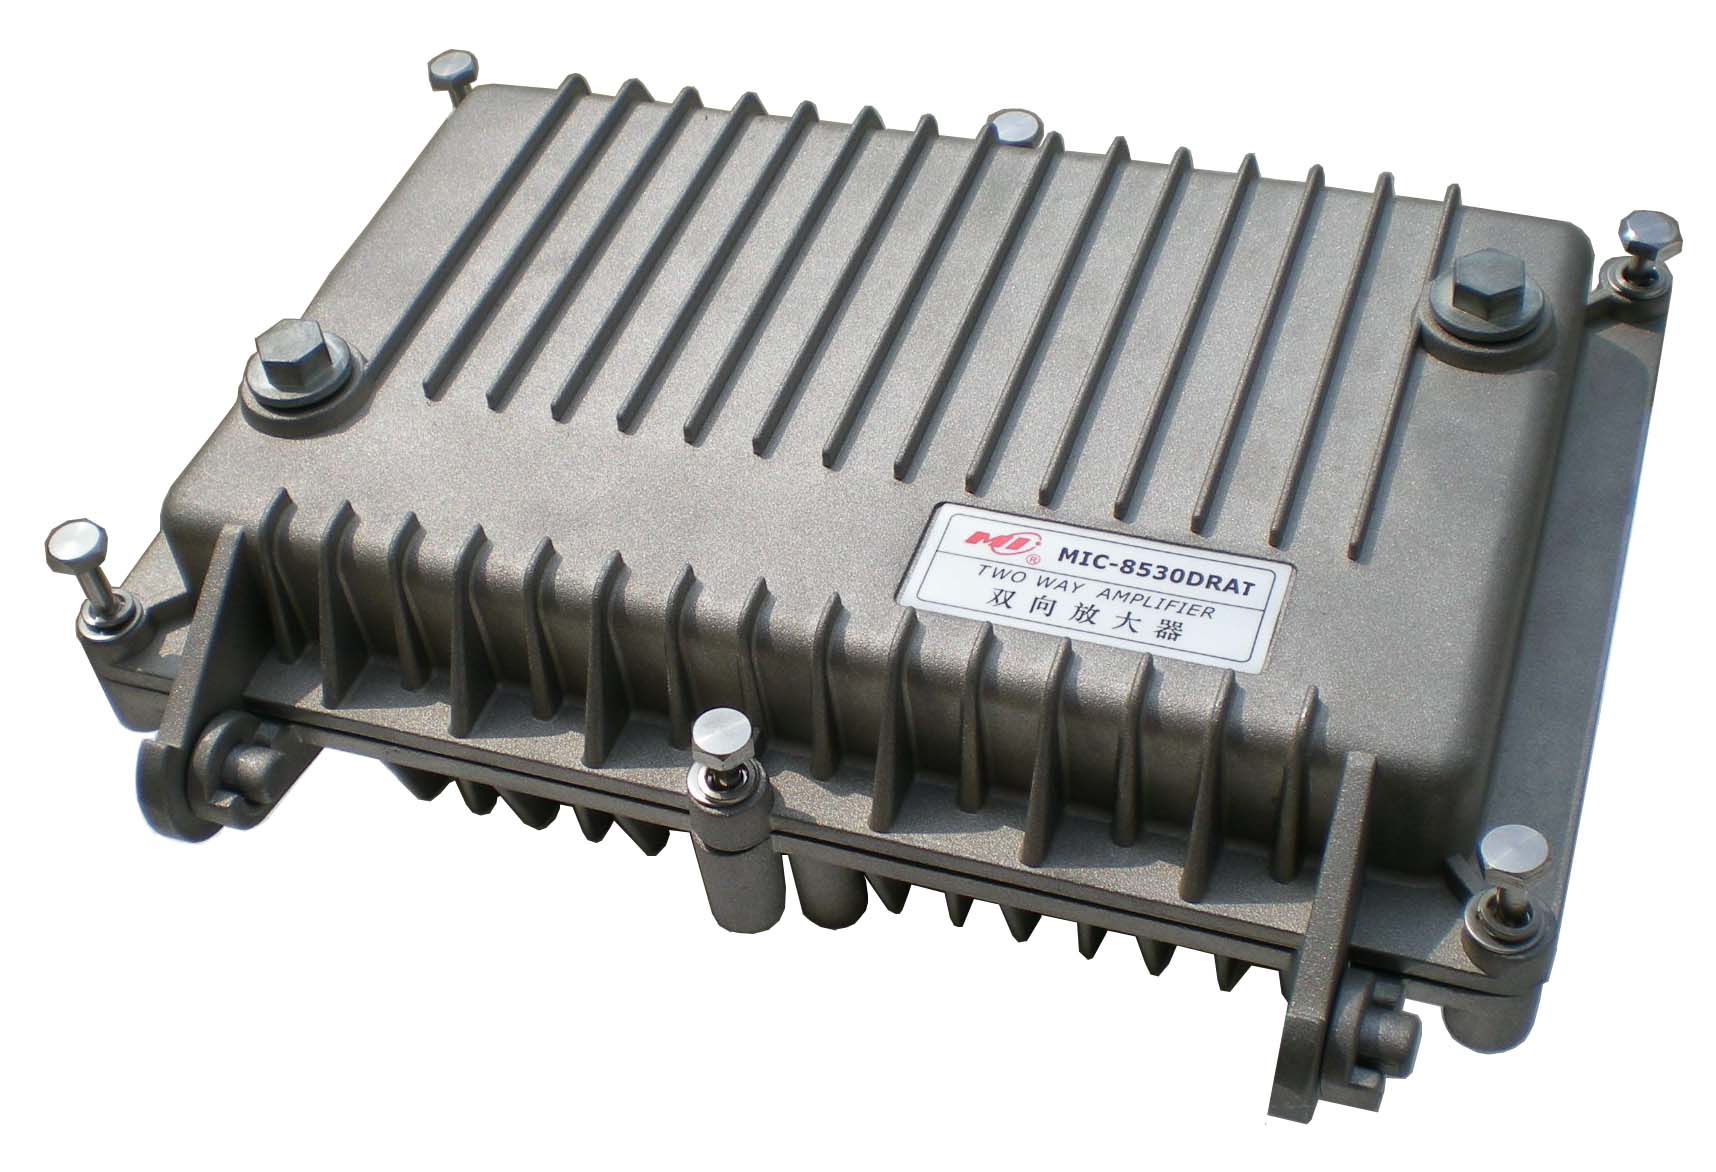 high-gain two-way line extender amplifier